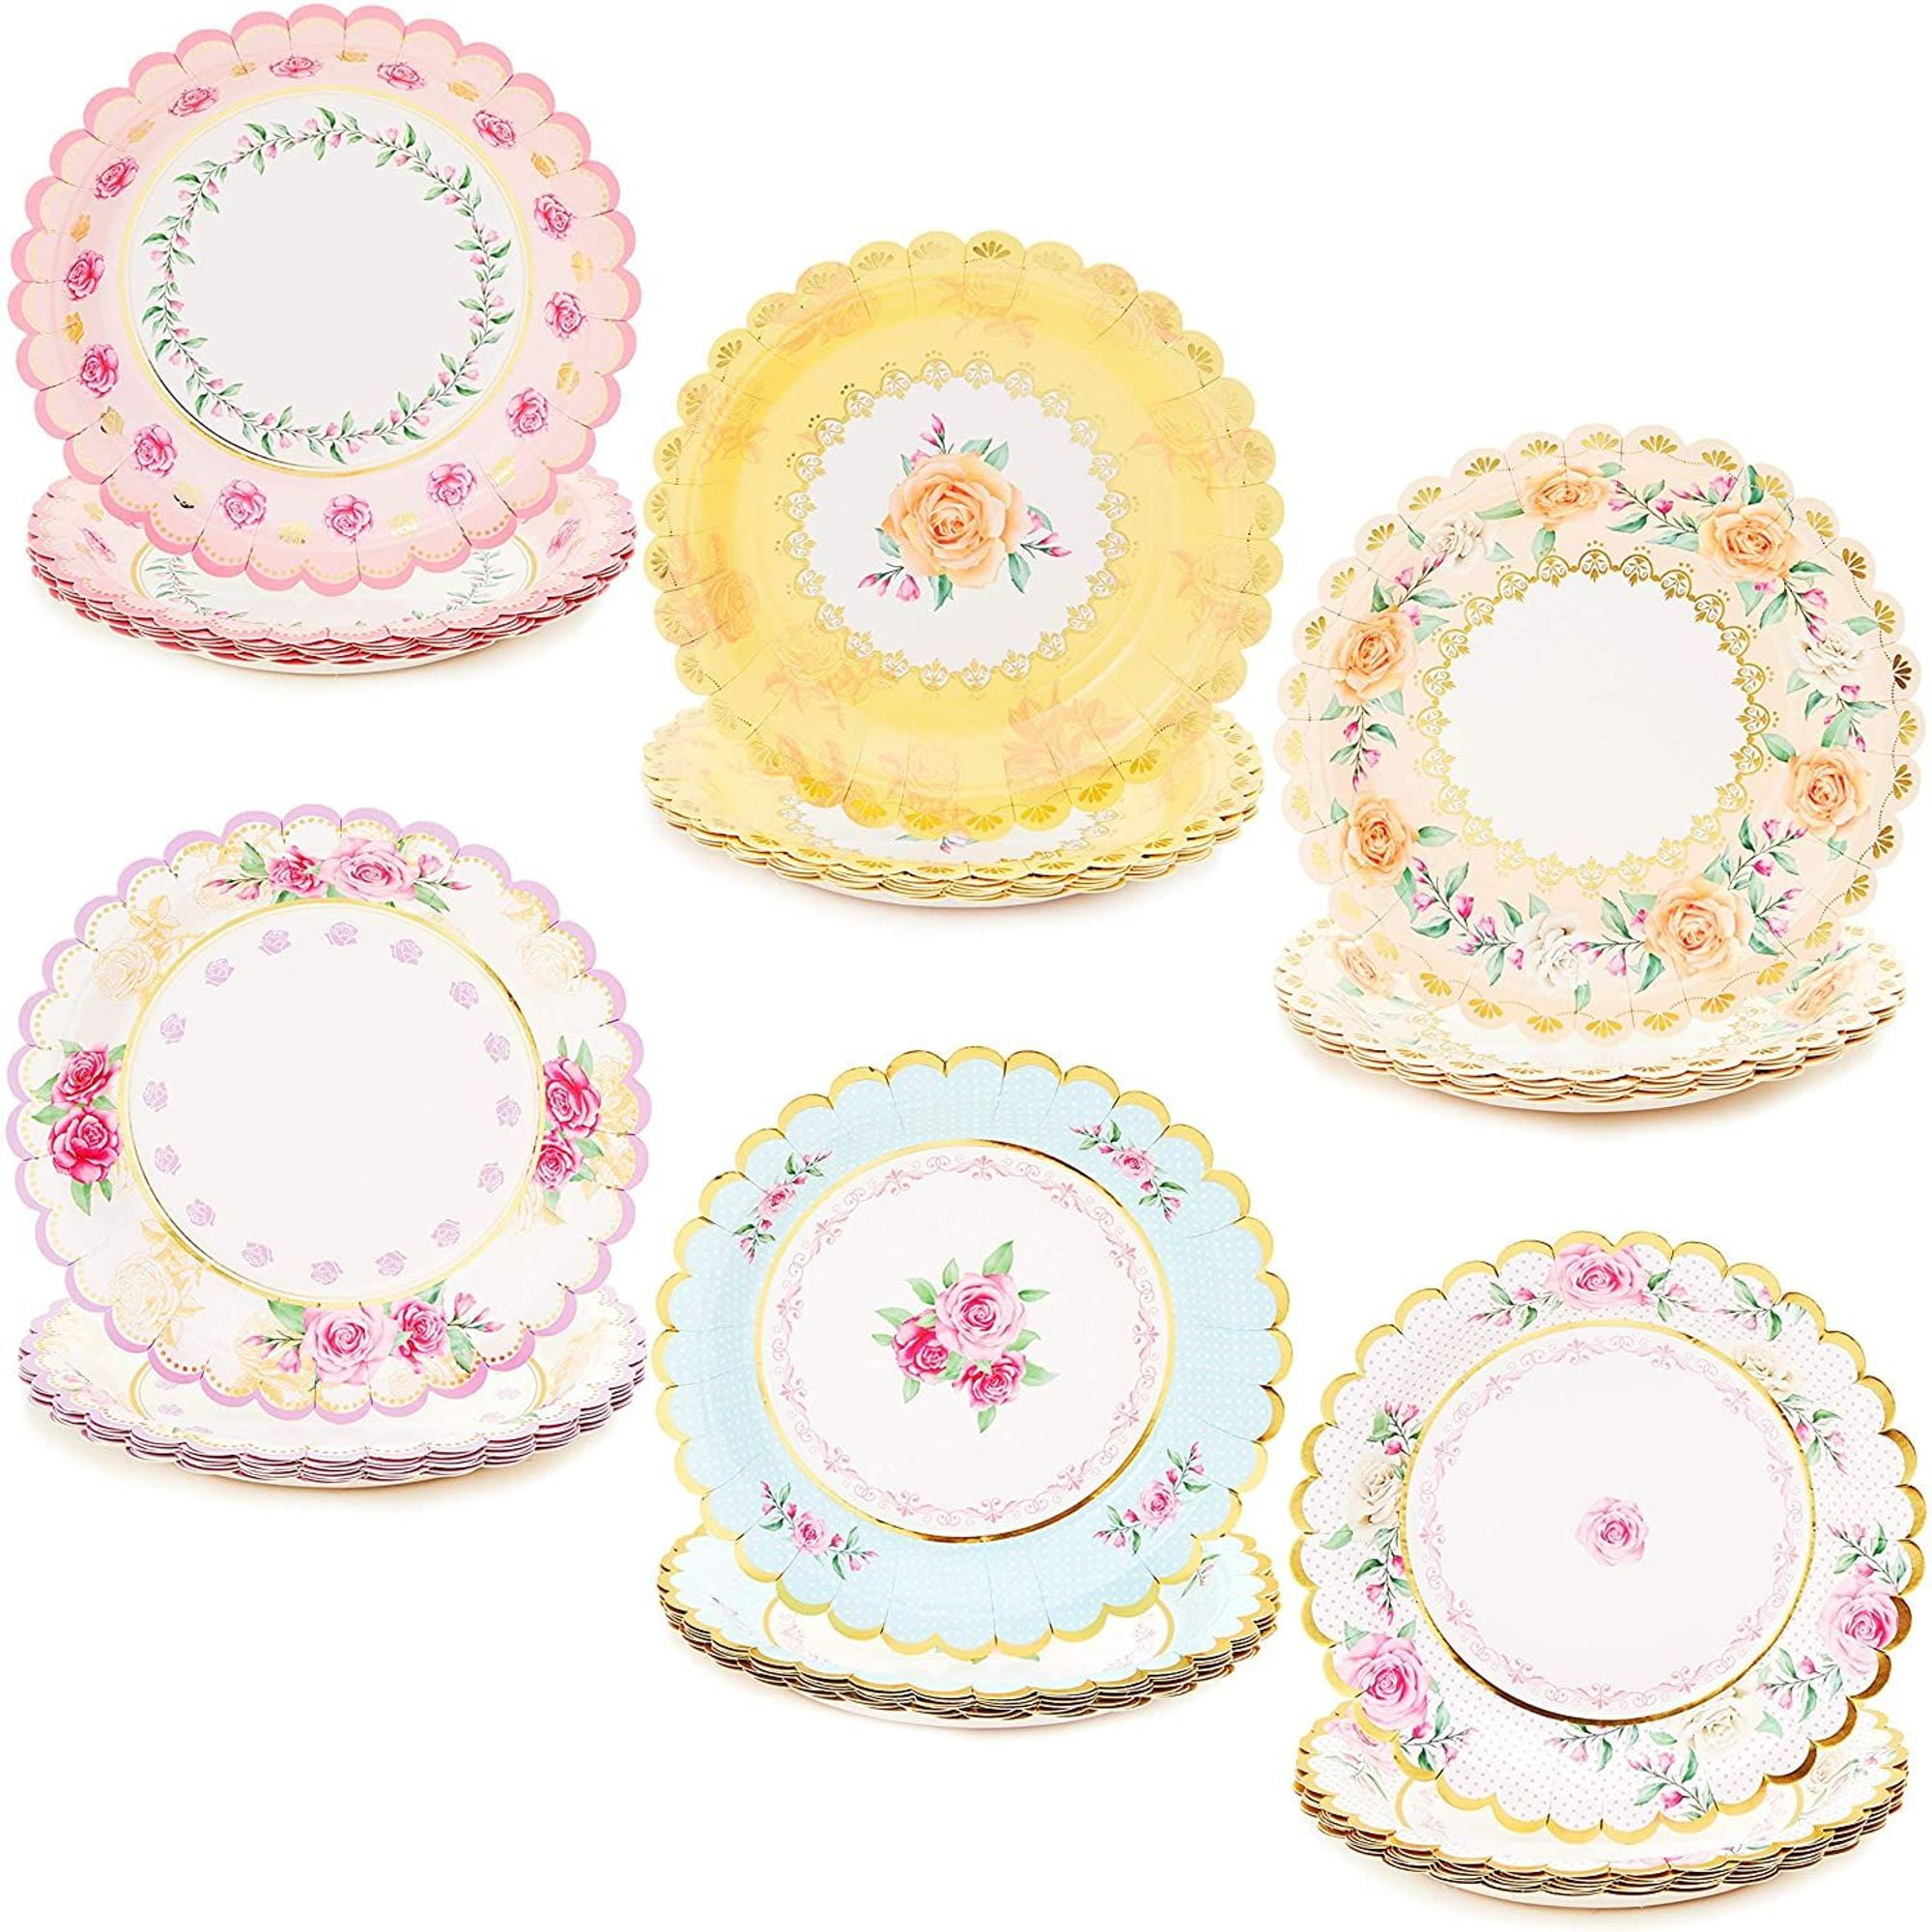 48-pack-tea-party-supplies-disposable-scalloped-paper-plates-in-vintage-floral-rose-design-for